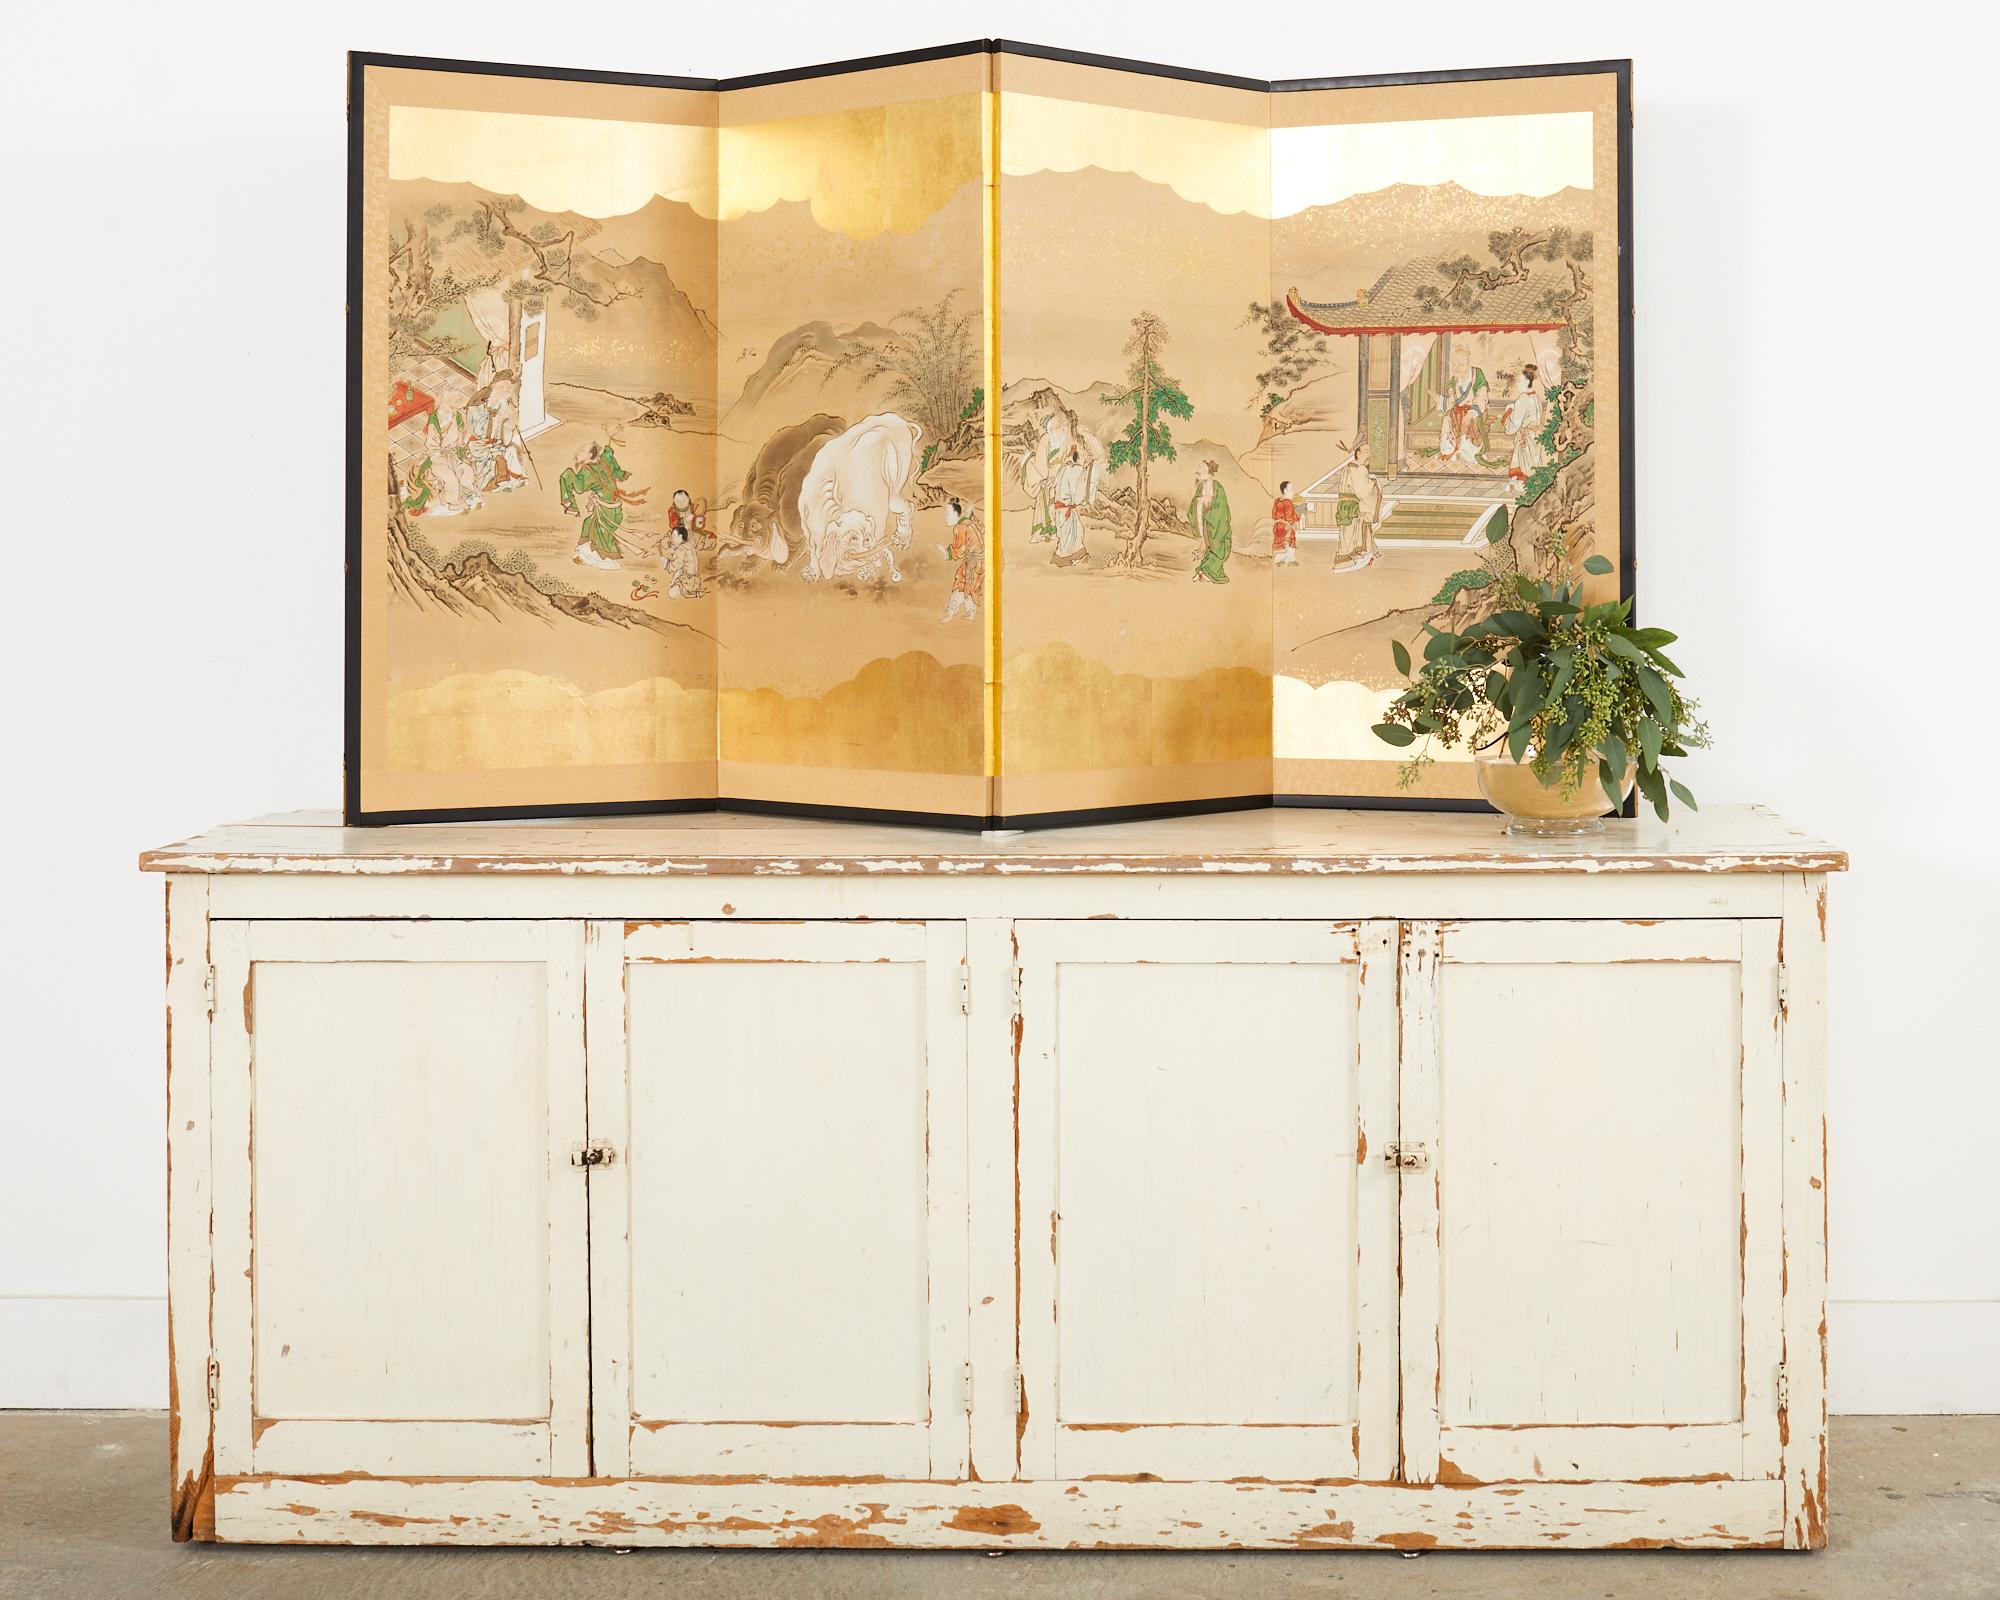 Early 19th century late Edo period Japanese four-panel screen depicting examples from the 24 paragons of filial piety. Painted in the Kano School style featuring figures in colorful, ornate robes and mythical elephant beasts. Ink and natural color